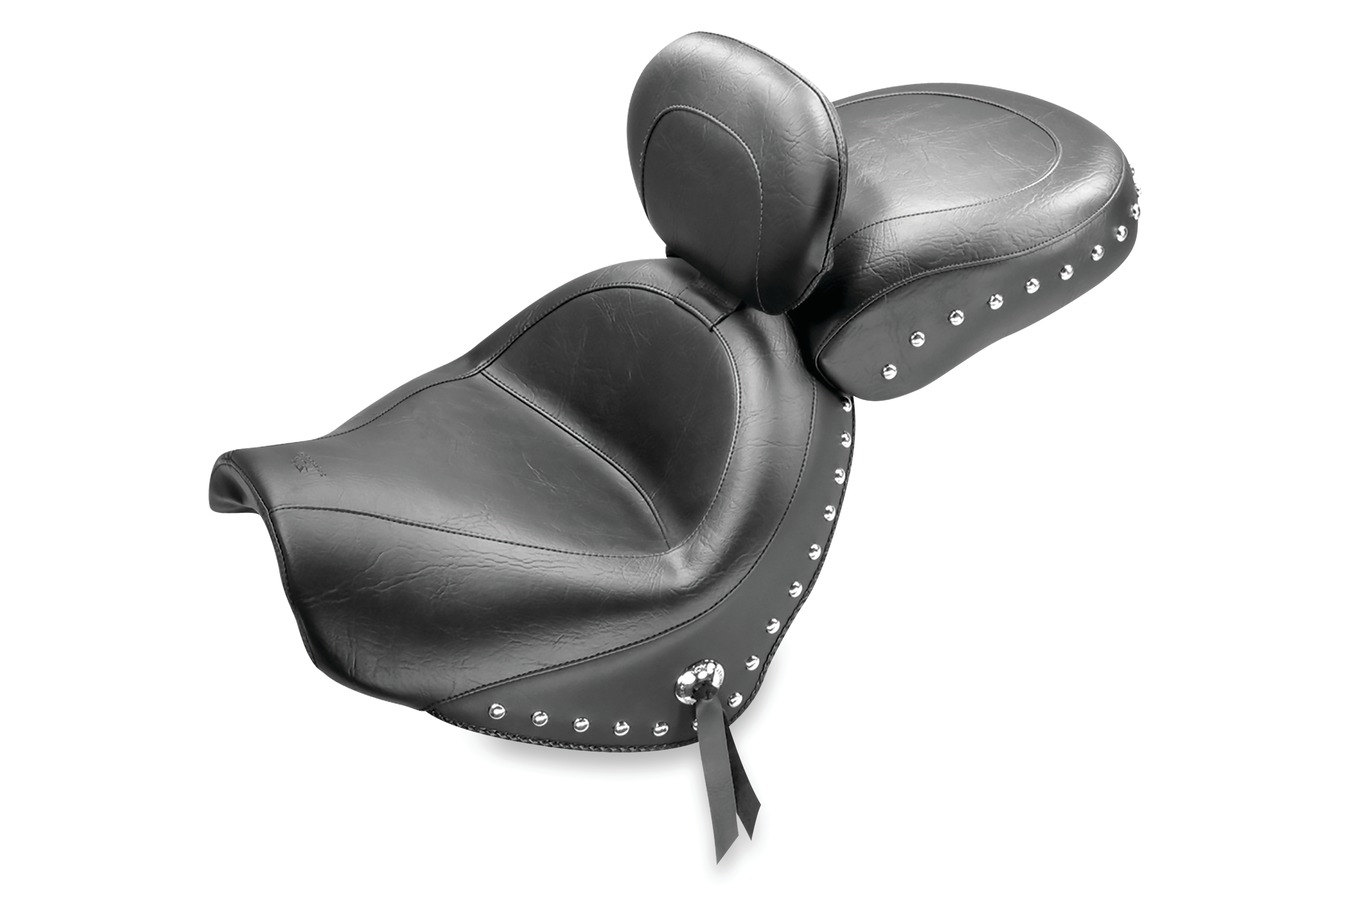 Standard Touring Two-Piece Seat with Driver Backrest for Suzuki Boulevard C50 & C50T 2009-